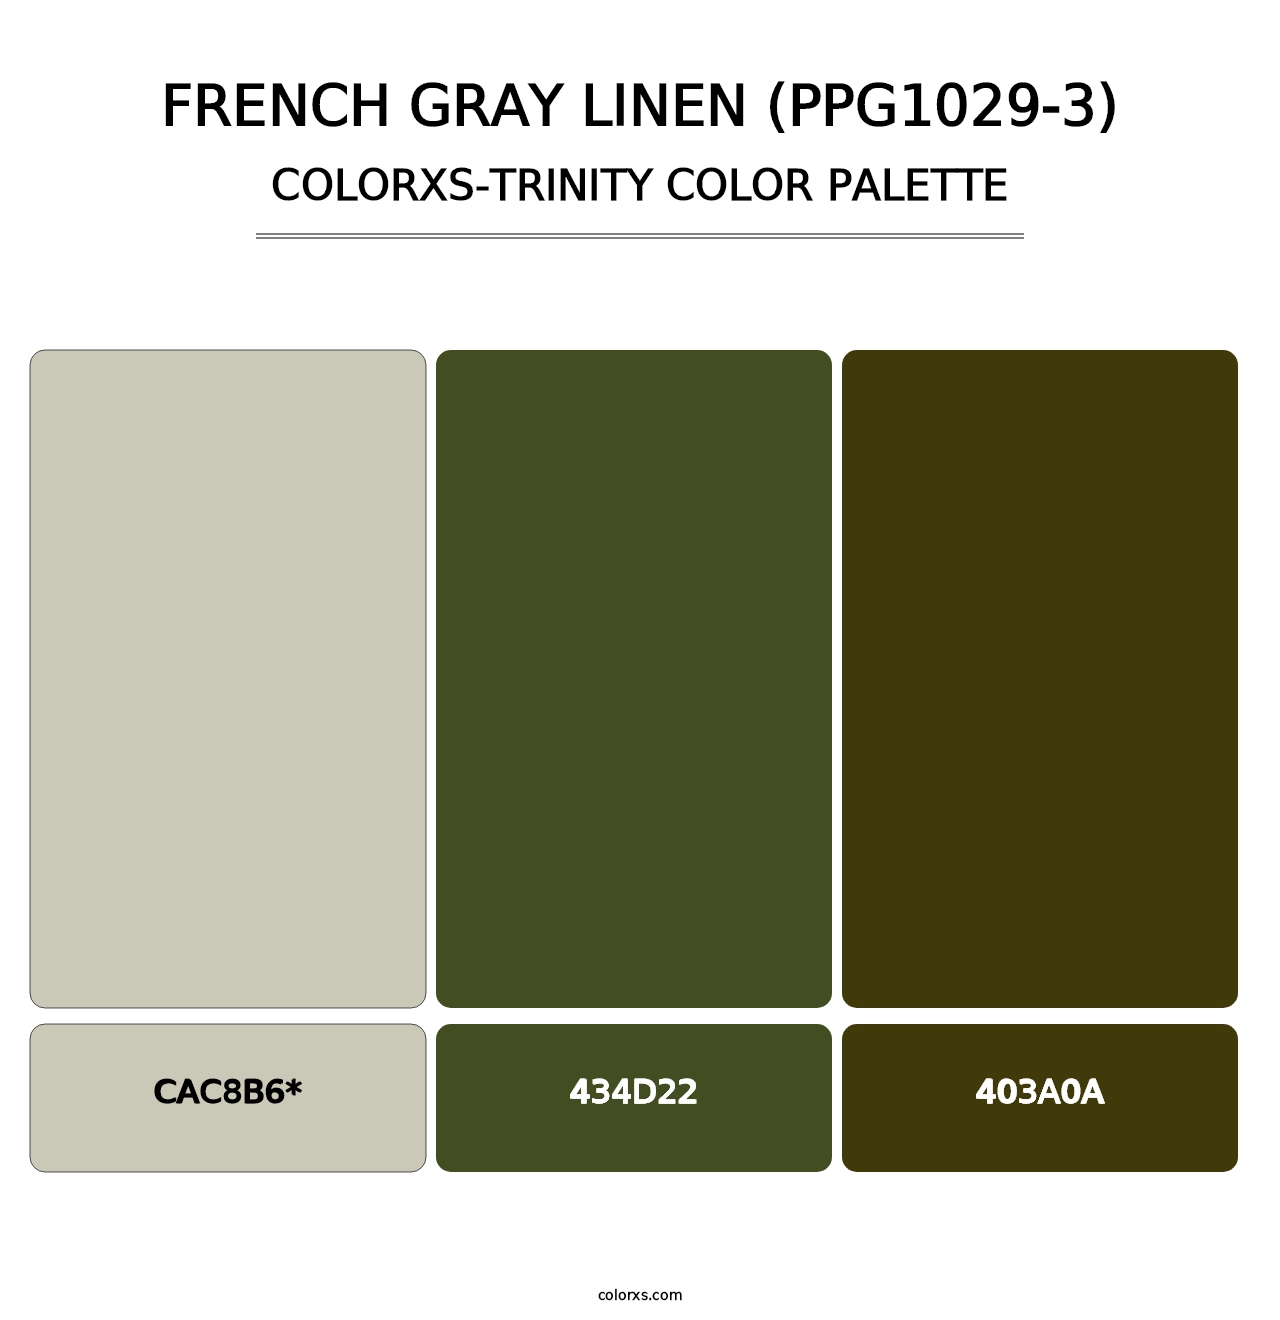 French Gray Linen (PPG1029-3) - Colorxs Trinity Palette